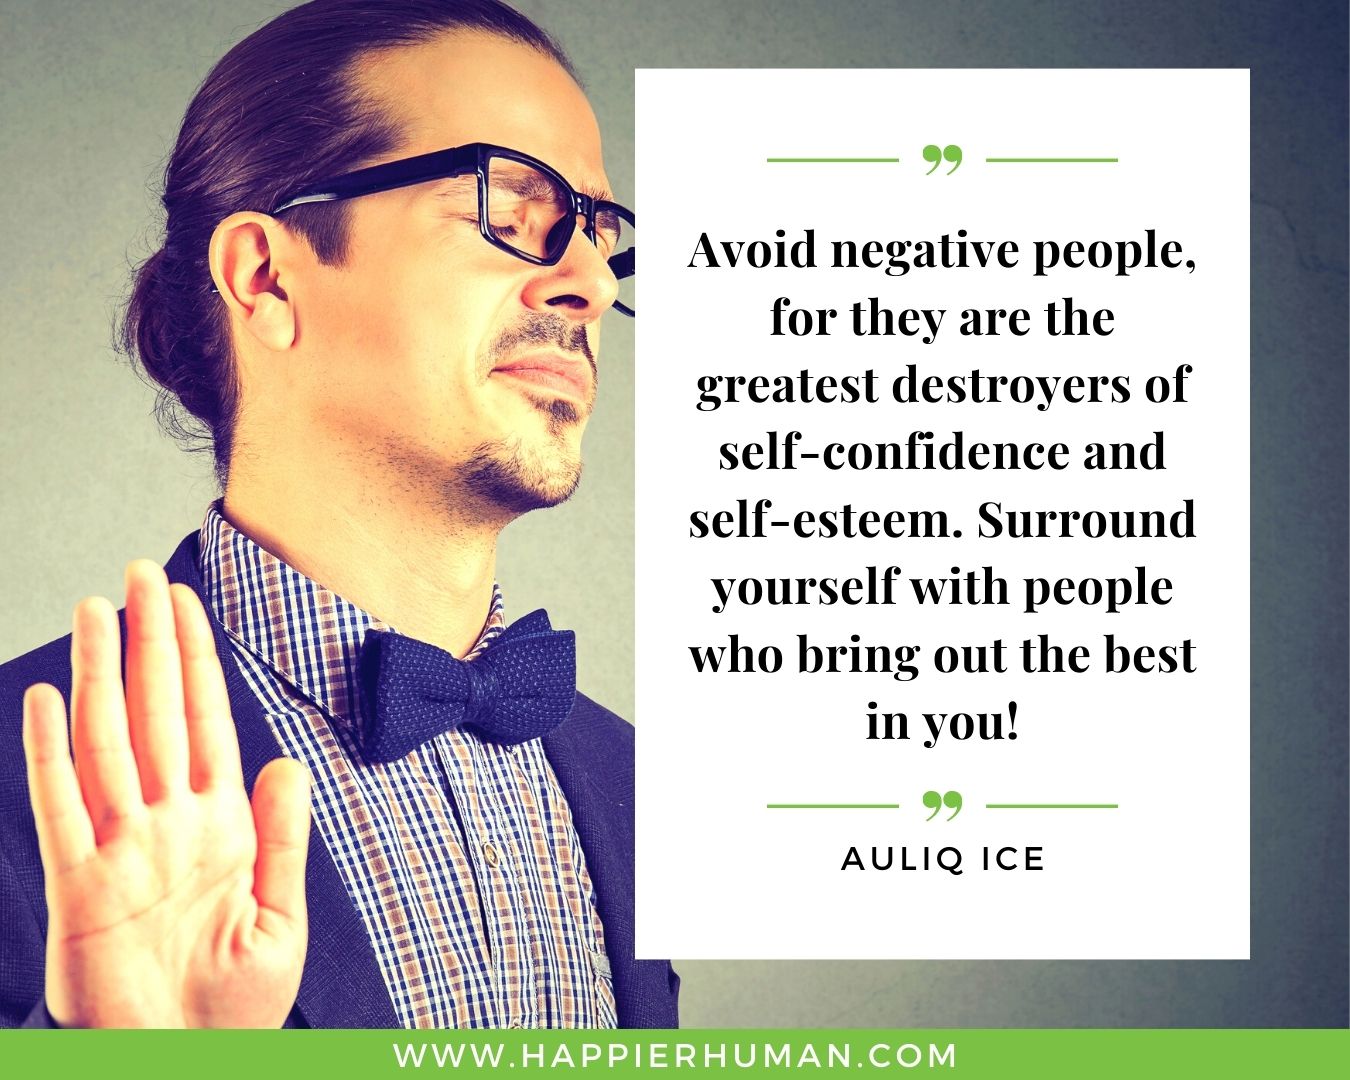 Toxic People Quotes - “Avoid negative people, for they are the greatest destroyers of self-confidence and self-esteem. Surround yourself with people who bring out the best in you!” – Auliq Ice